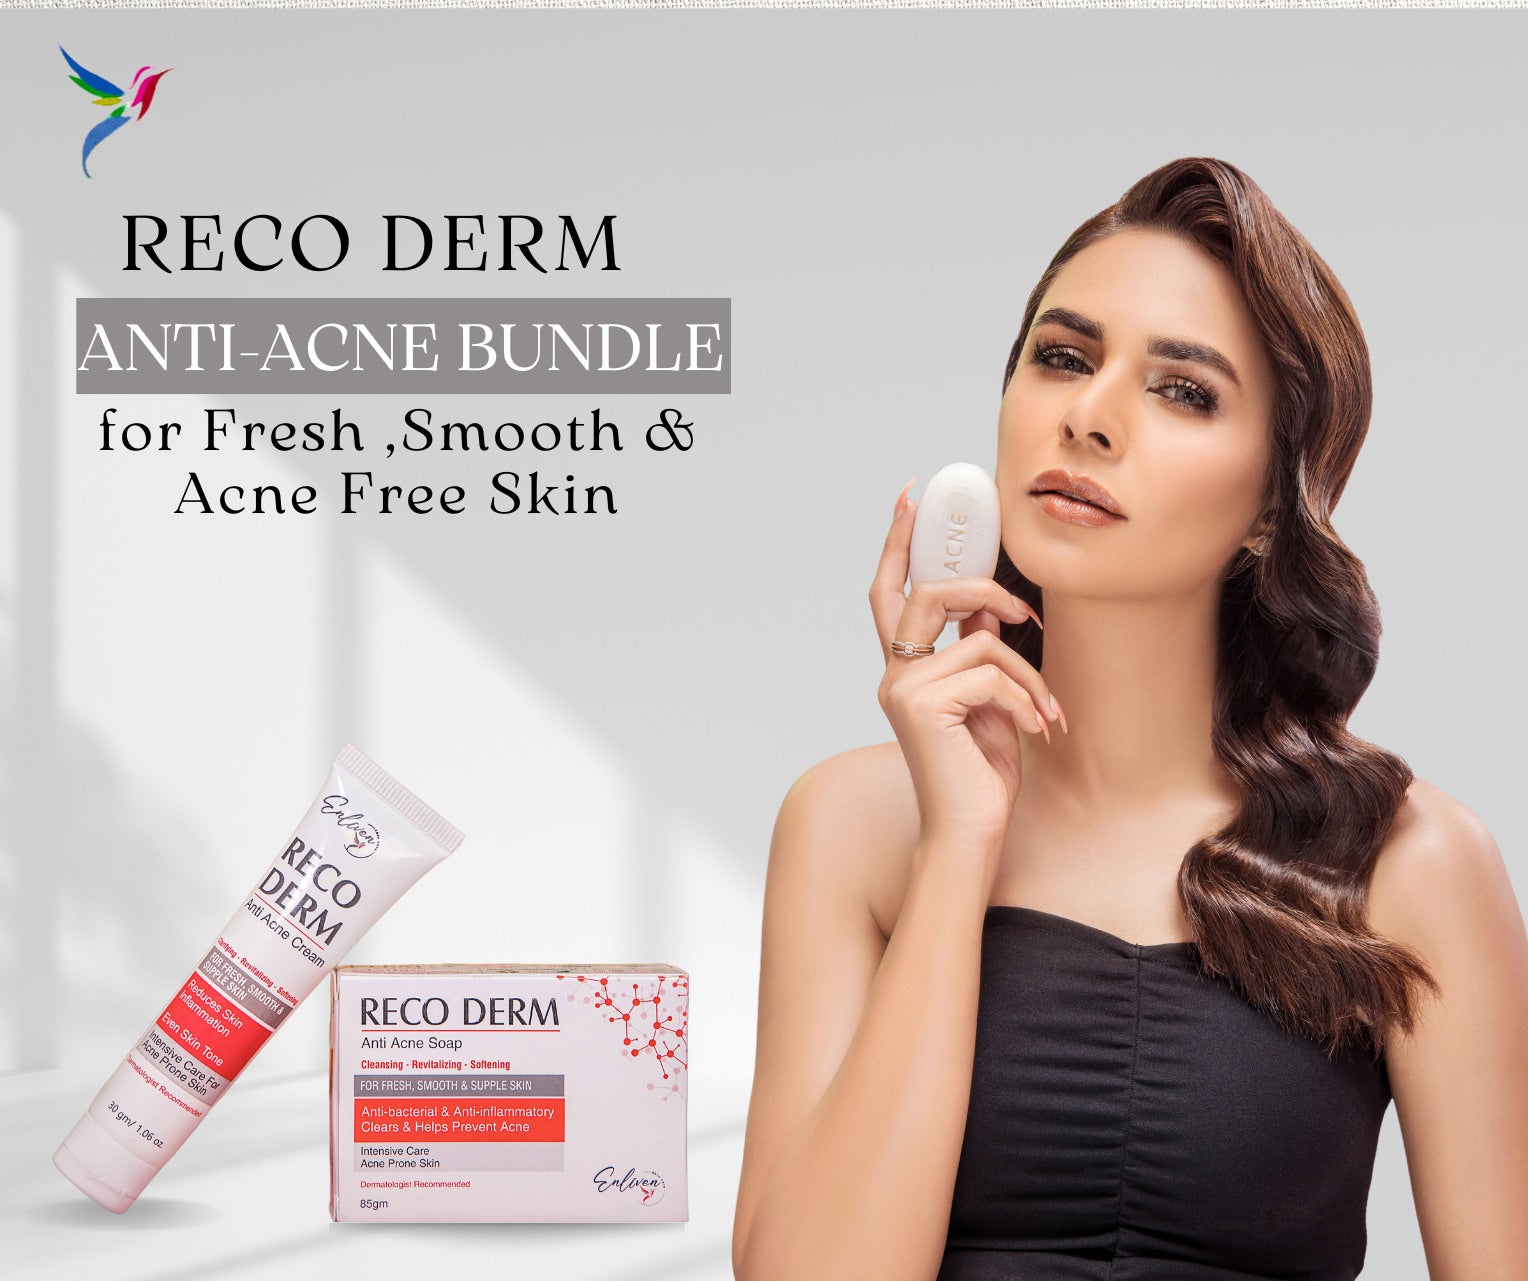 Acne Management with Reco Derm Bundle  from Enliven Skincare